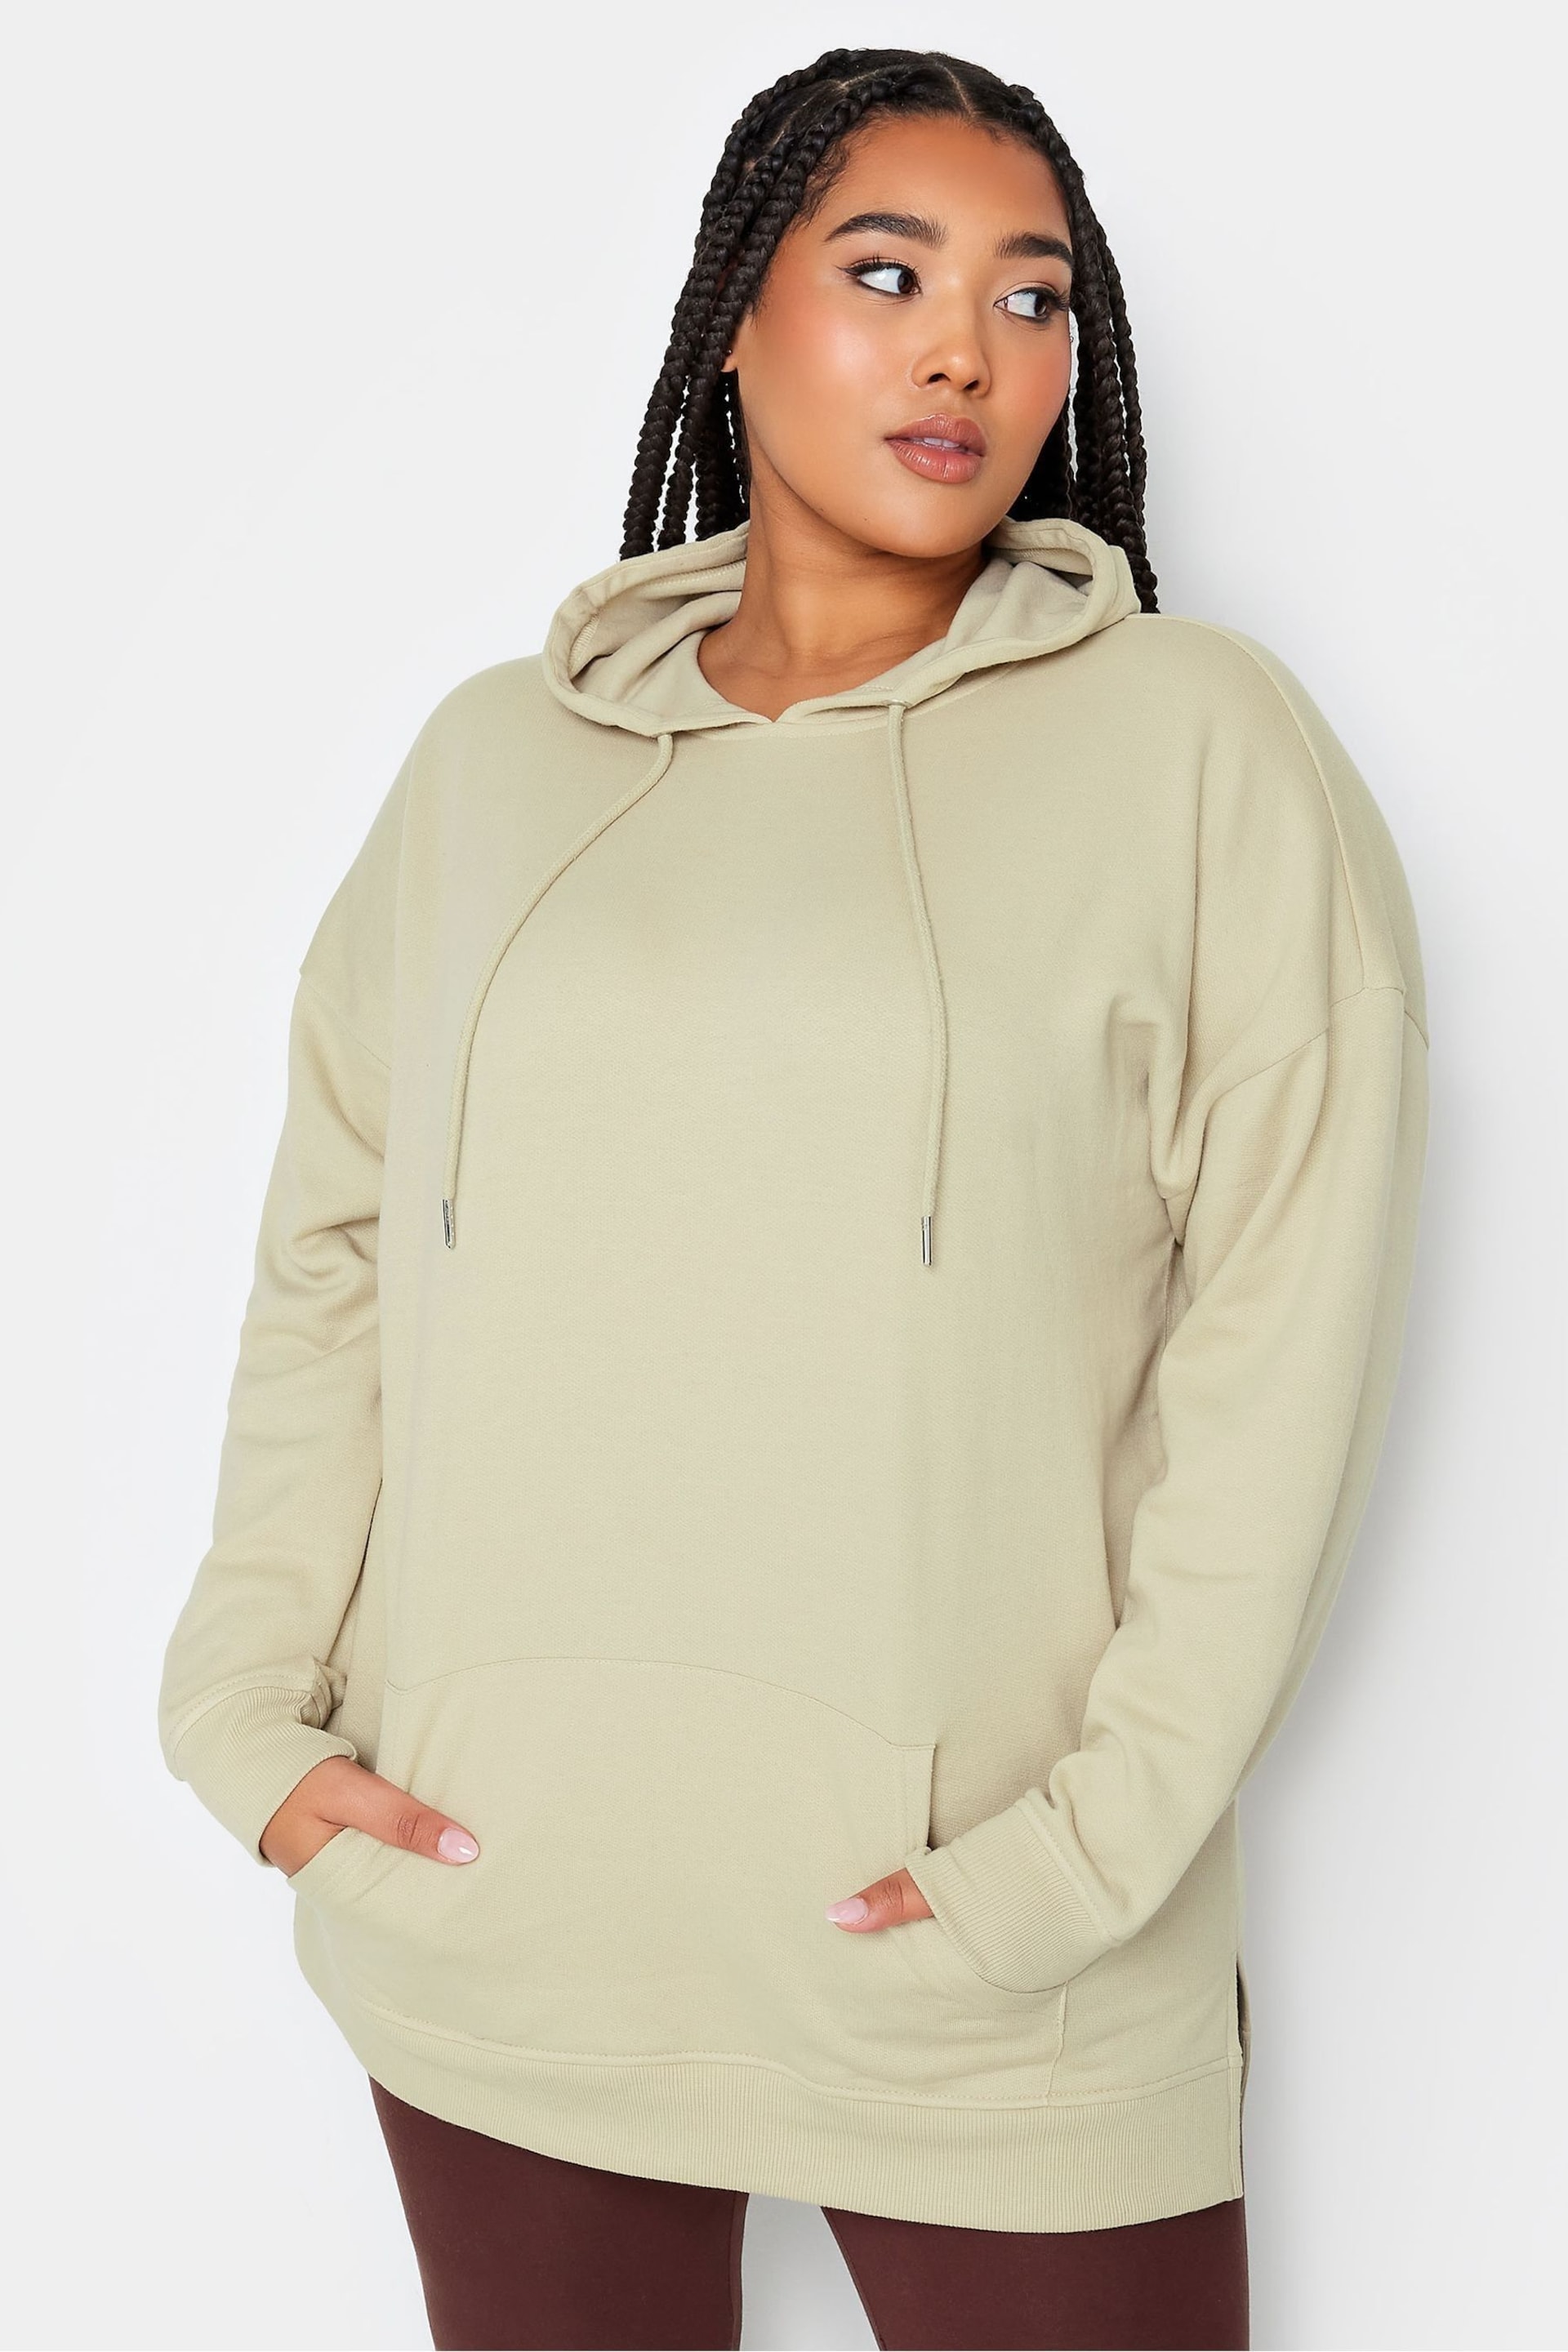 Yours Curve Brown Light Overhead Hoodie - Image 1 of 4